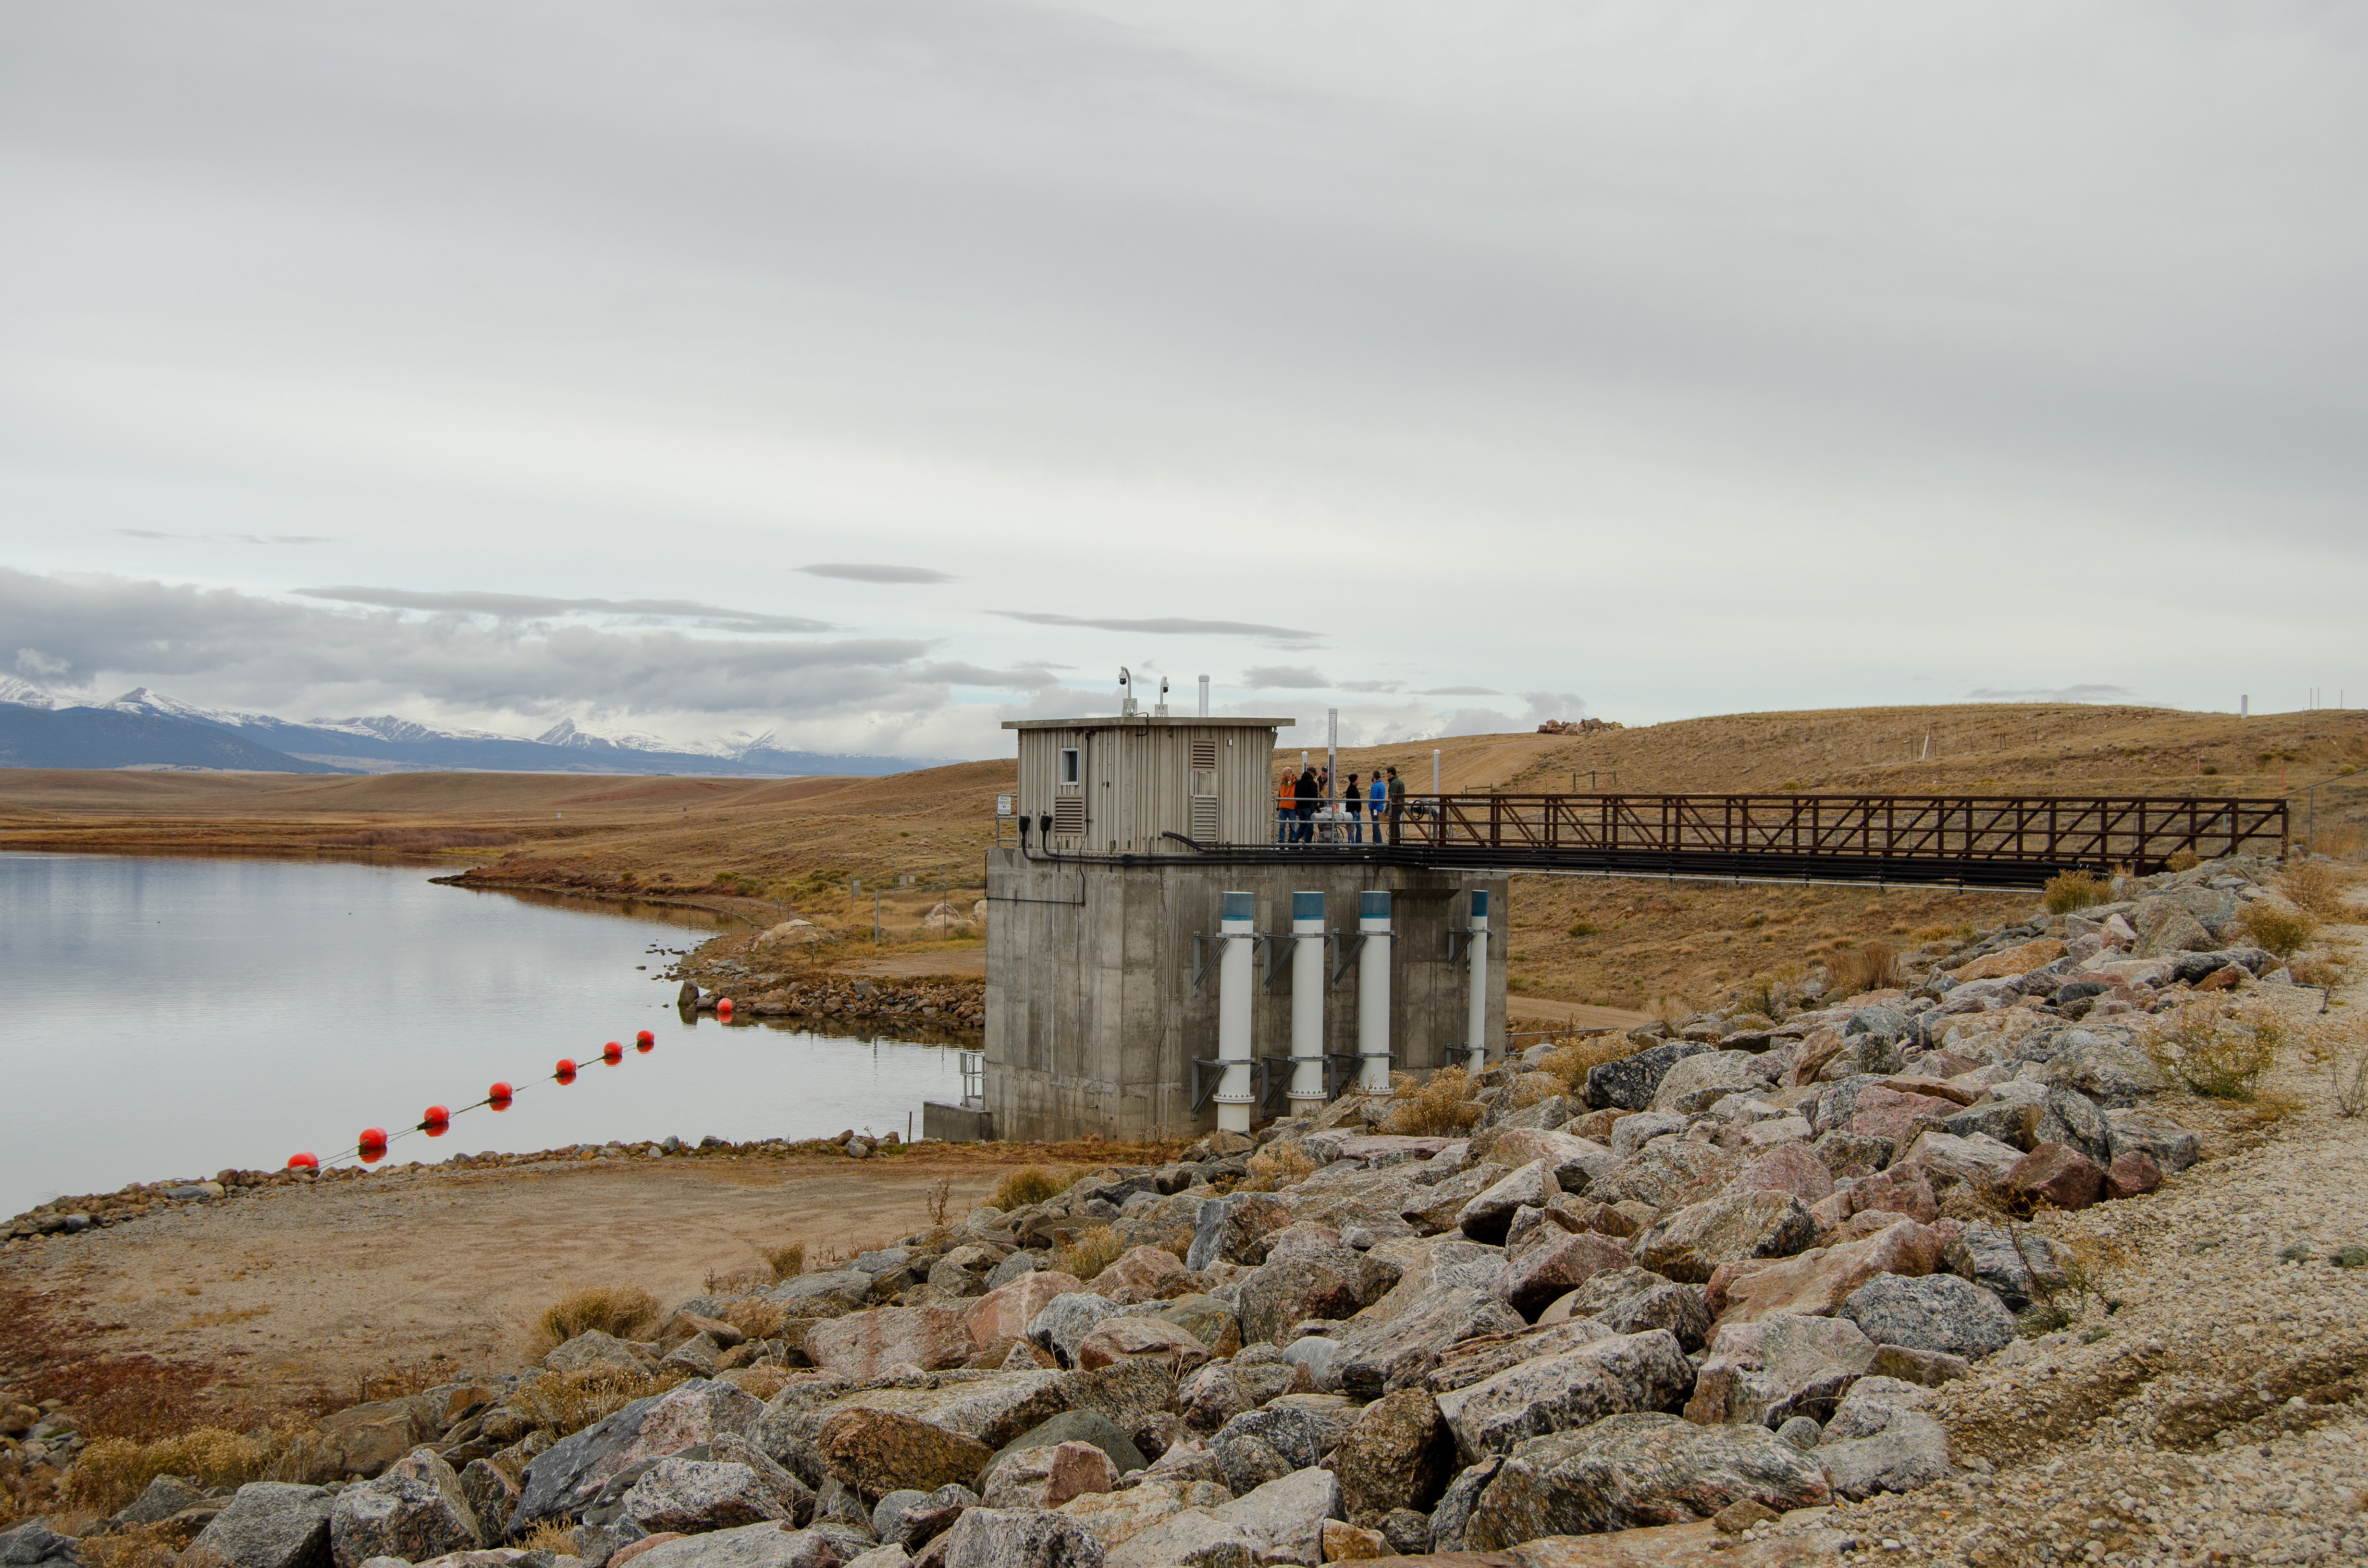 People stand on a bridge looking at equipment that is part of the Antero Reservoir dam.